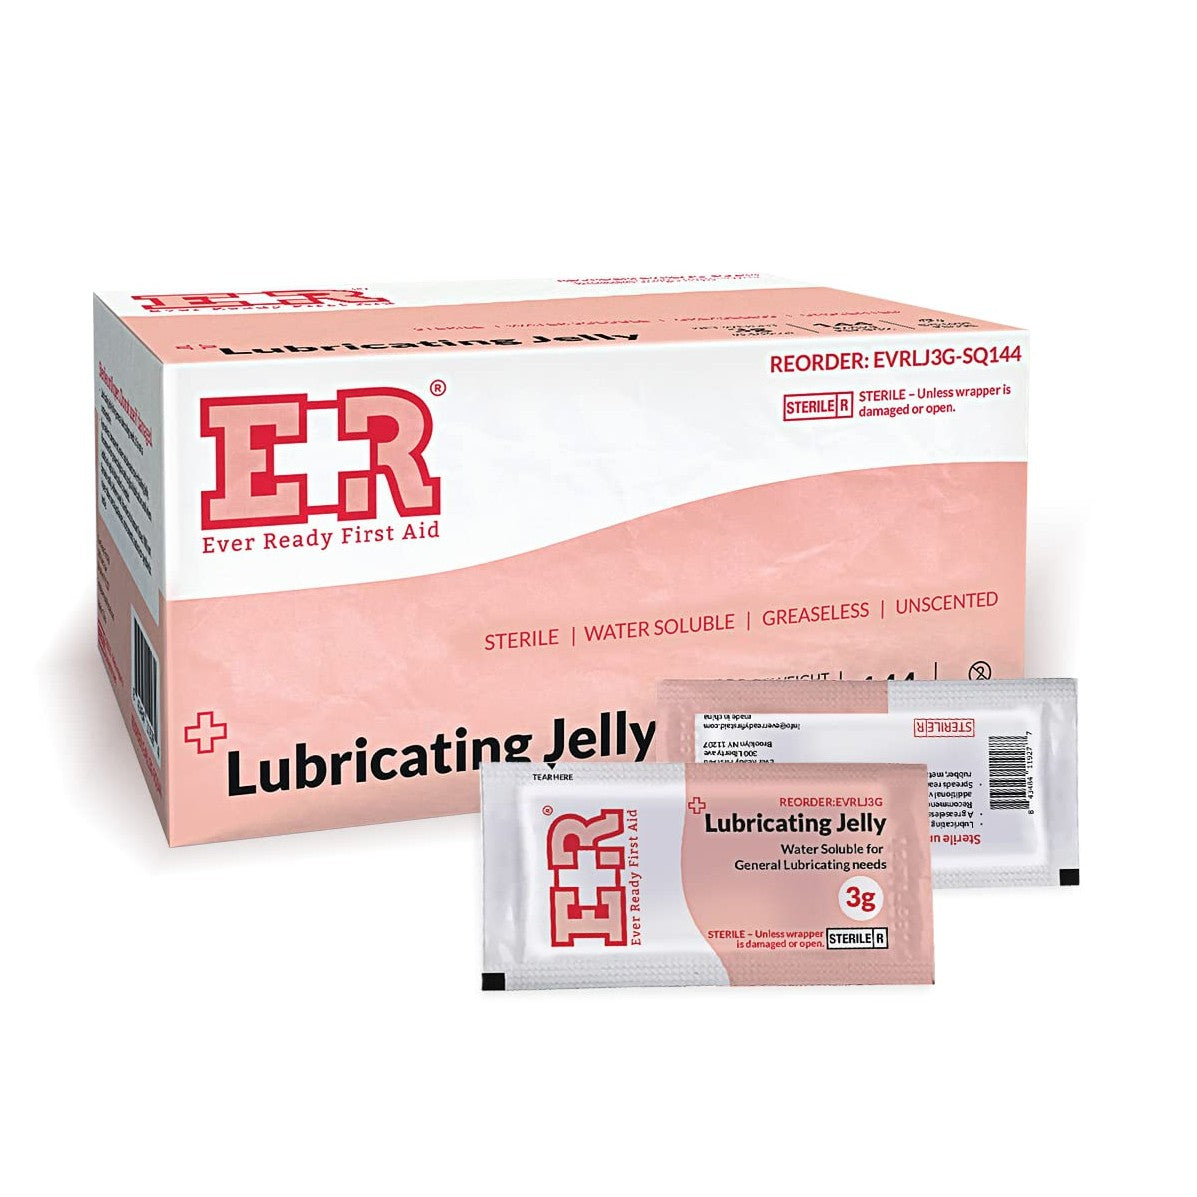 Ever Ready First Aid Lubricating Jelly - Box of 144 Packets